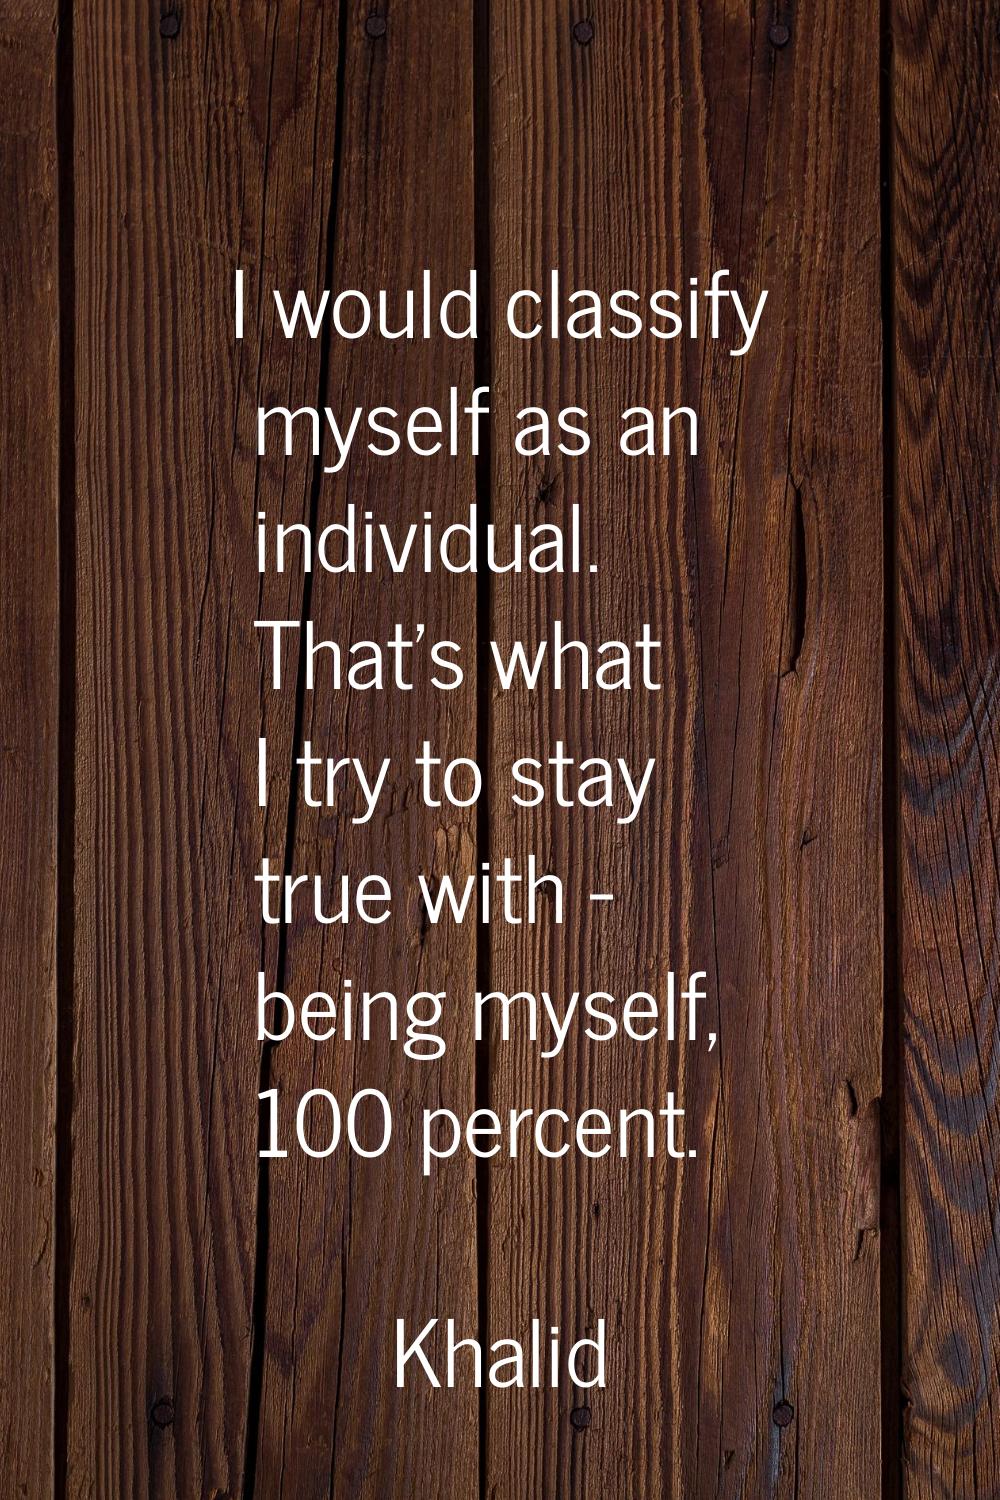 I would classify myself as an individual. That's what I try to stay true with - being myself, 100 p